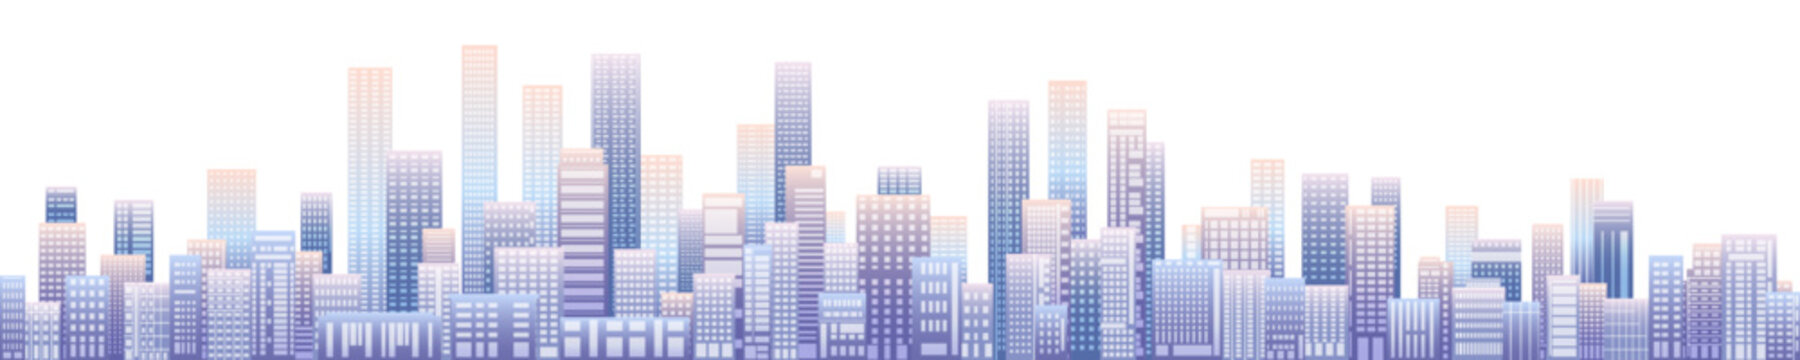 Urban silhouette landscape. Abstract horizontal banner, background cityscape. Panorama in frat style, header images for web. City buildings of business district. Vector illustration simple geometric